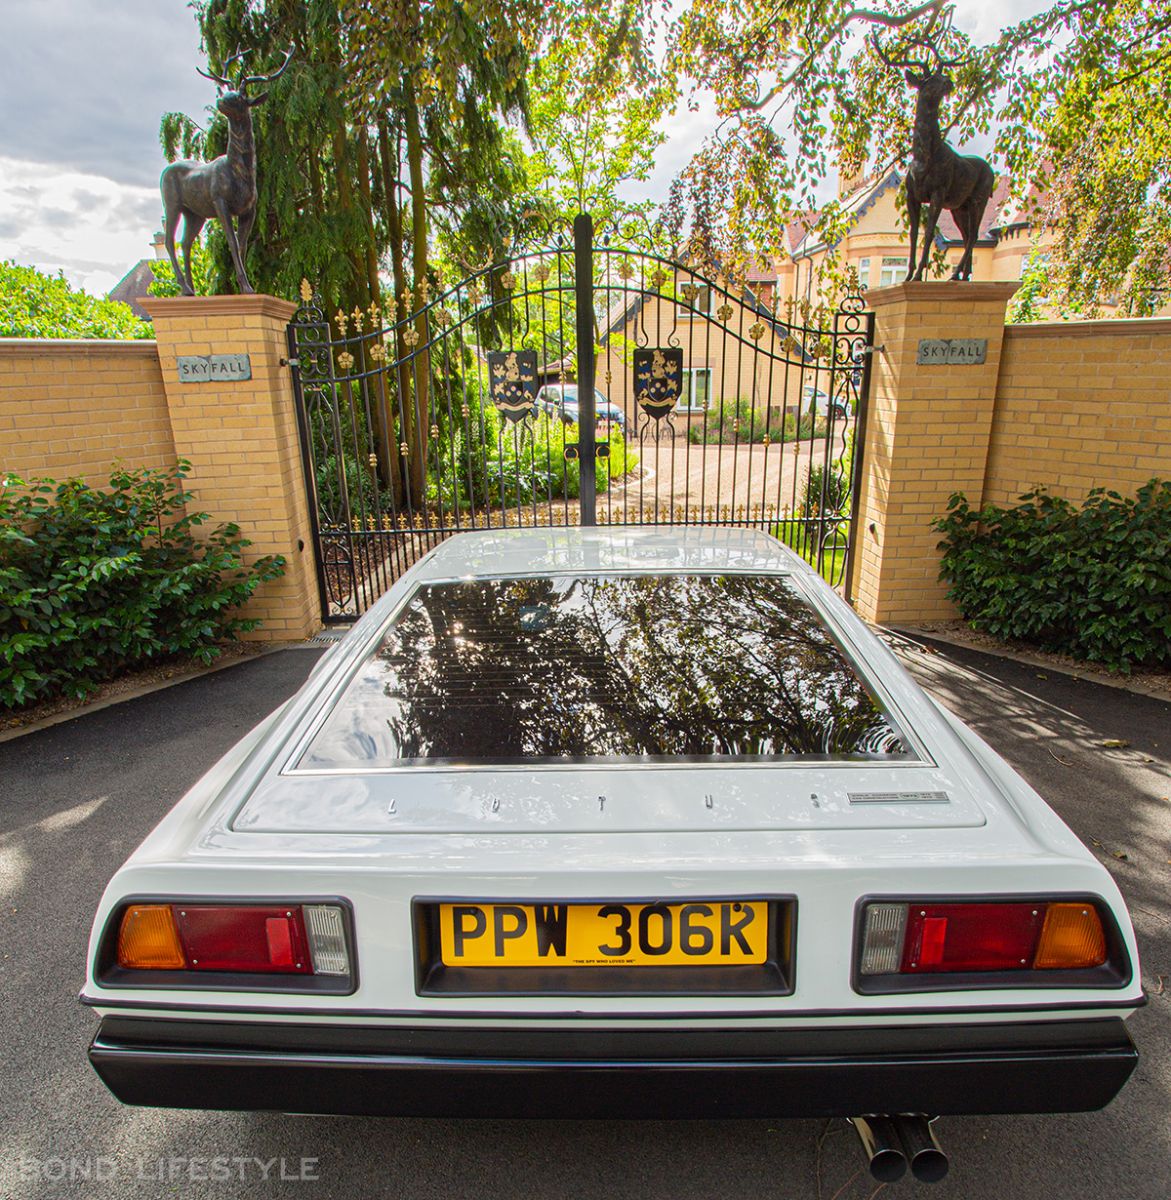 Lotus Esprit The Spy Who Loved Me rear licence plate skyfall gate